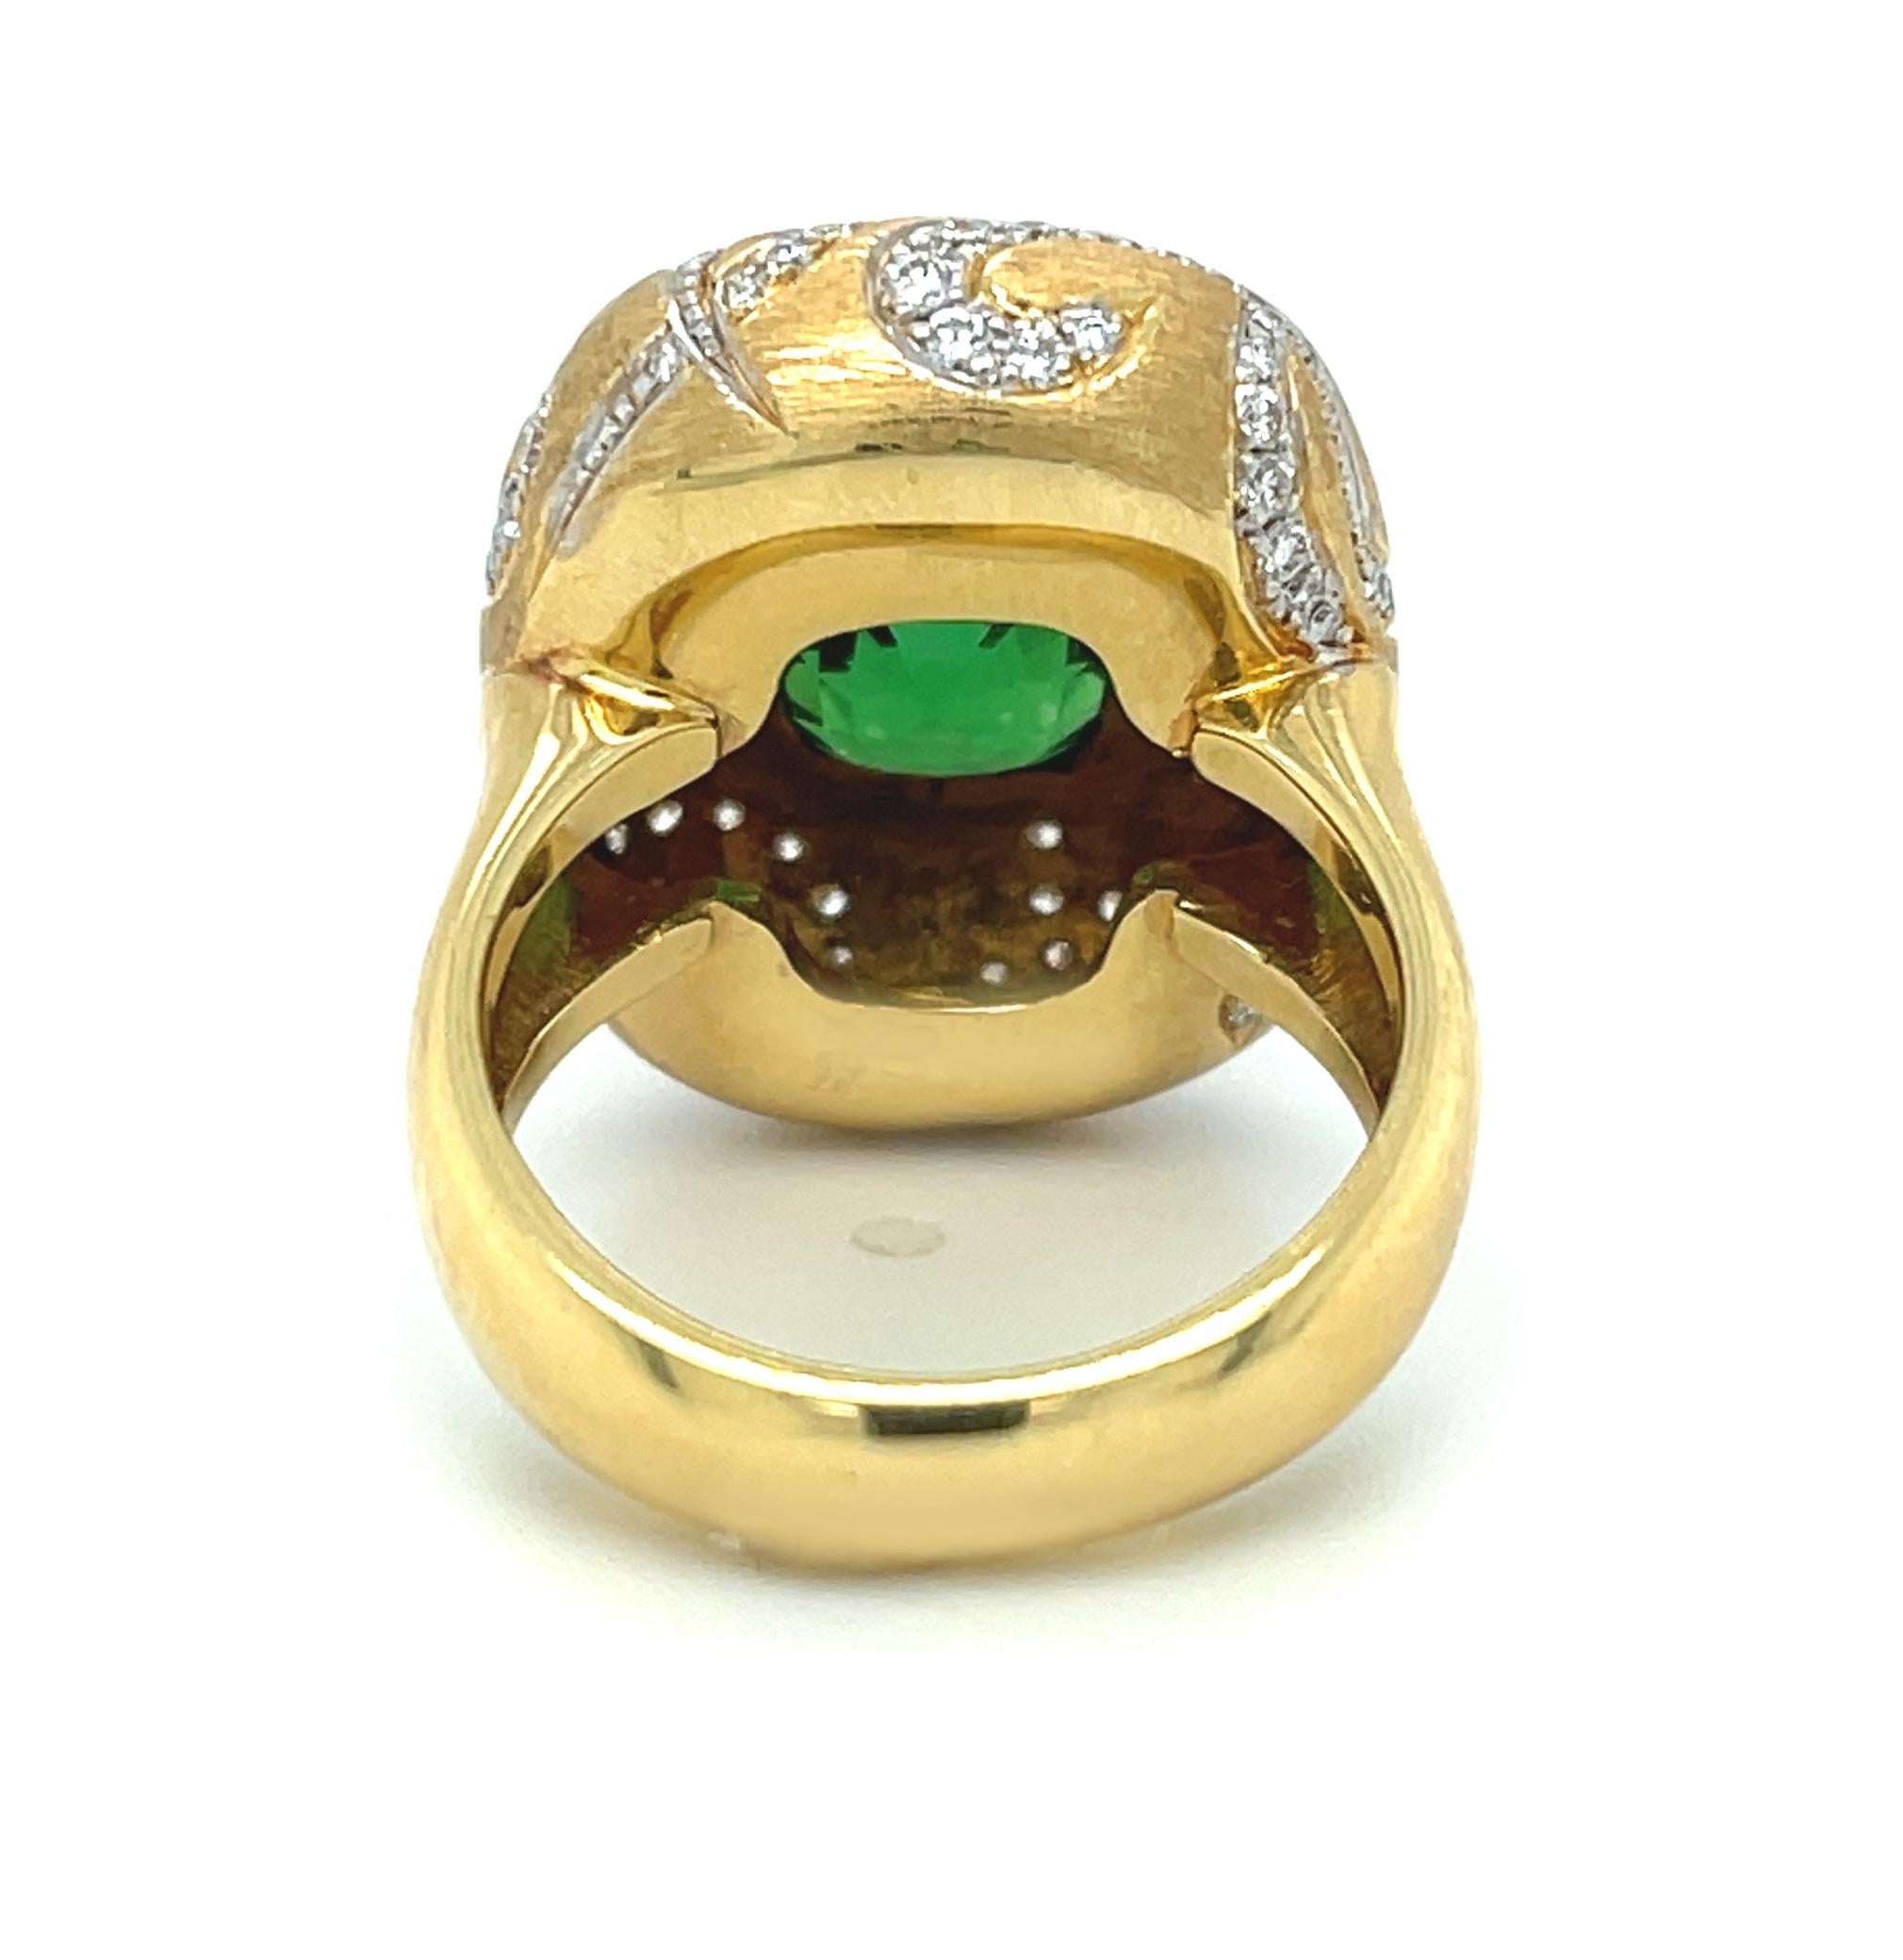 7.26 Carat Tsavorite Garnet and Diamond 18k Yellow Gold Handmade Ring In New Condition For Sale In Los Angeles, CA